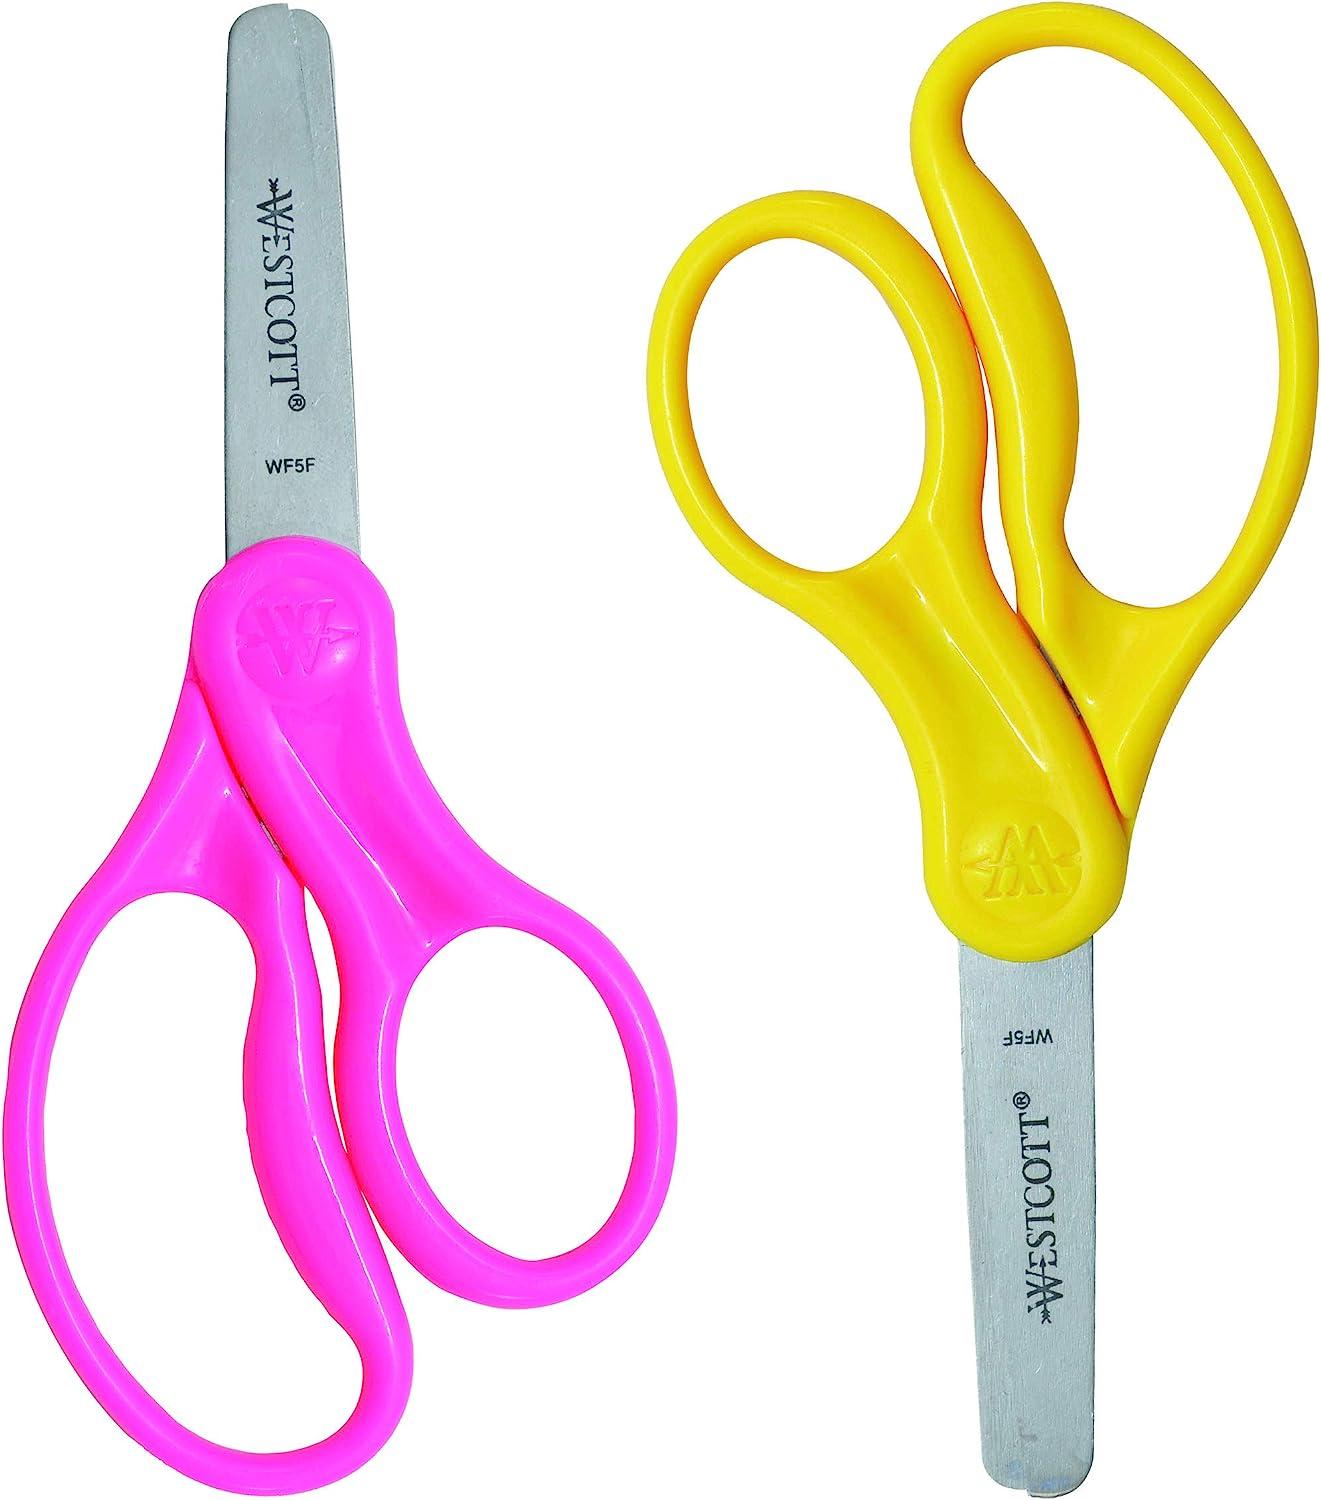  Westcott 55843 Right- and Left-Handed Scissors, Kids' Scissors,  Ages 4-8, 5-Inch Blunt Tip, 3 Pack, Assorted : Toys & Games